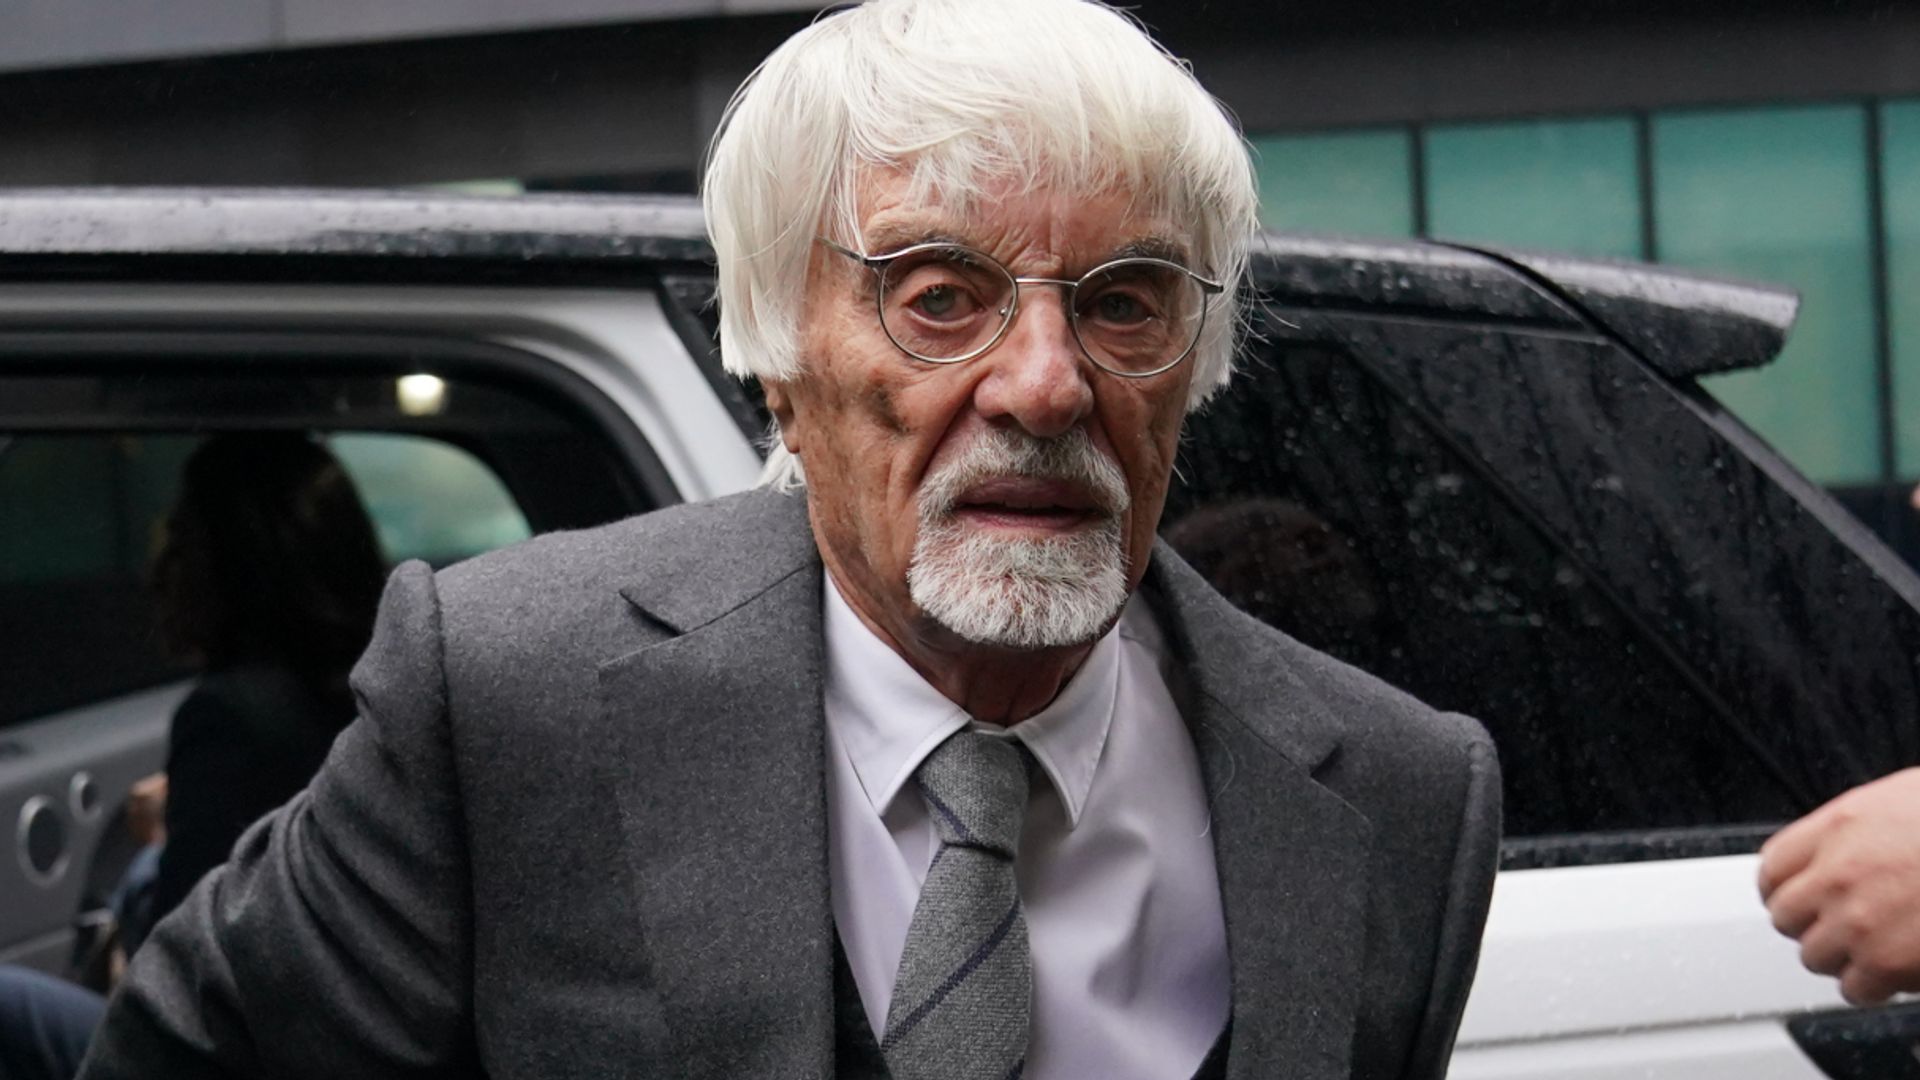 Ecclestone given suspended prison sentence for fraud